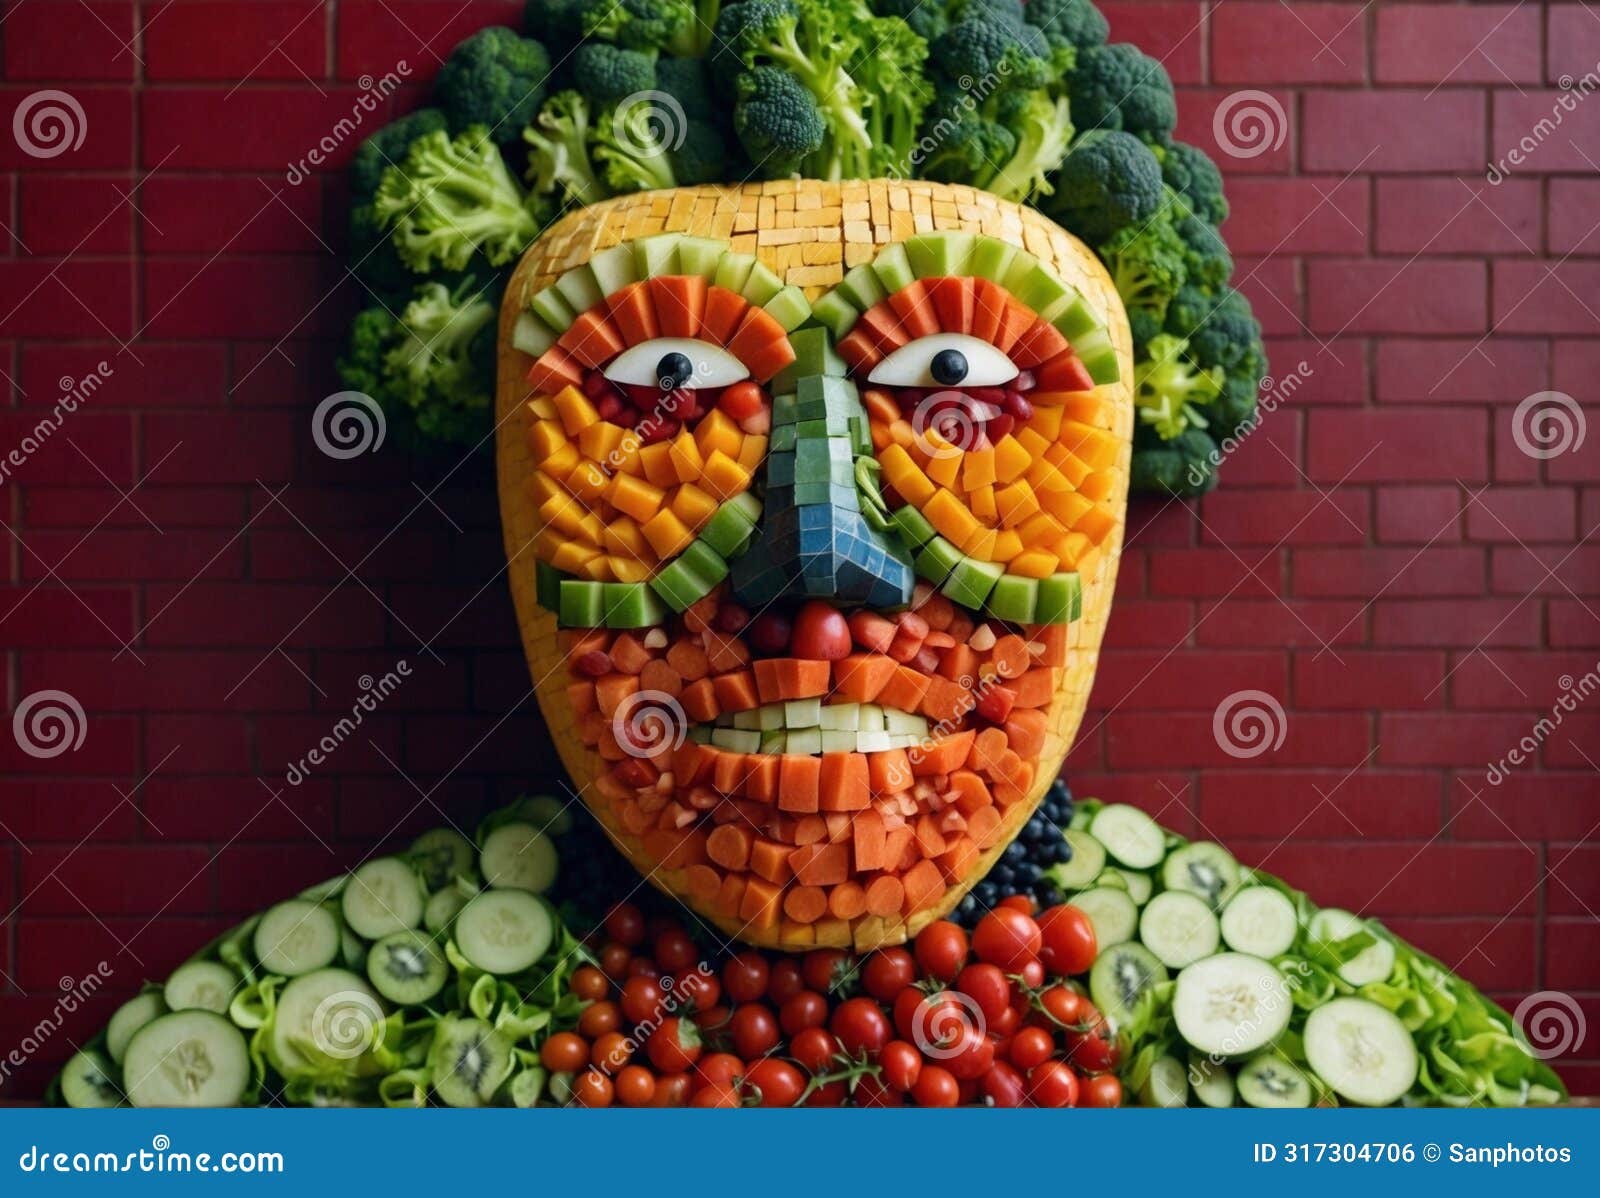 nature's portrait: mosaic face crafted from fresh fruits and vegetables